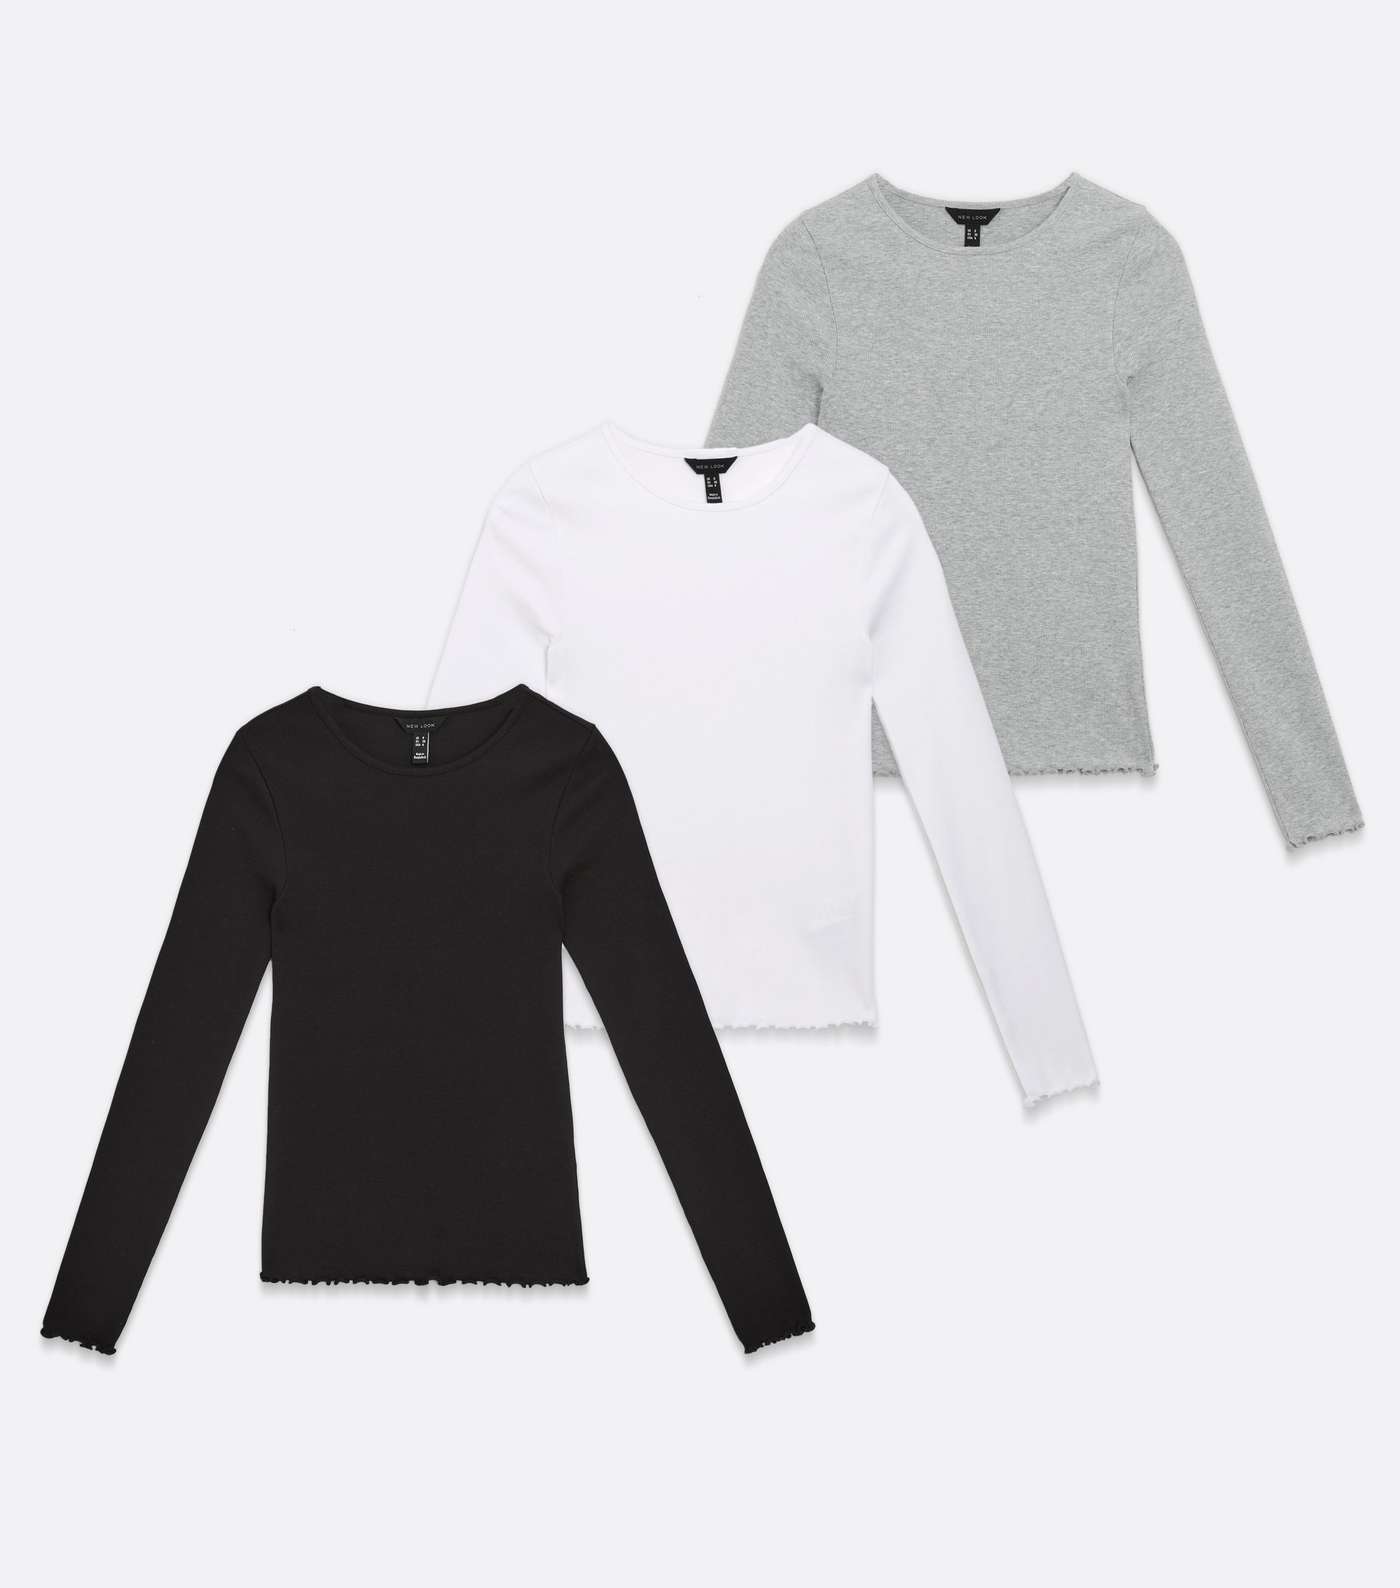 3 Pack Black White and Grey Frill Trim Long Sleeve Tops Image 5